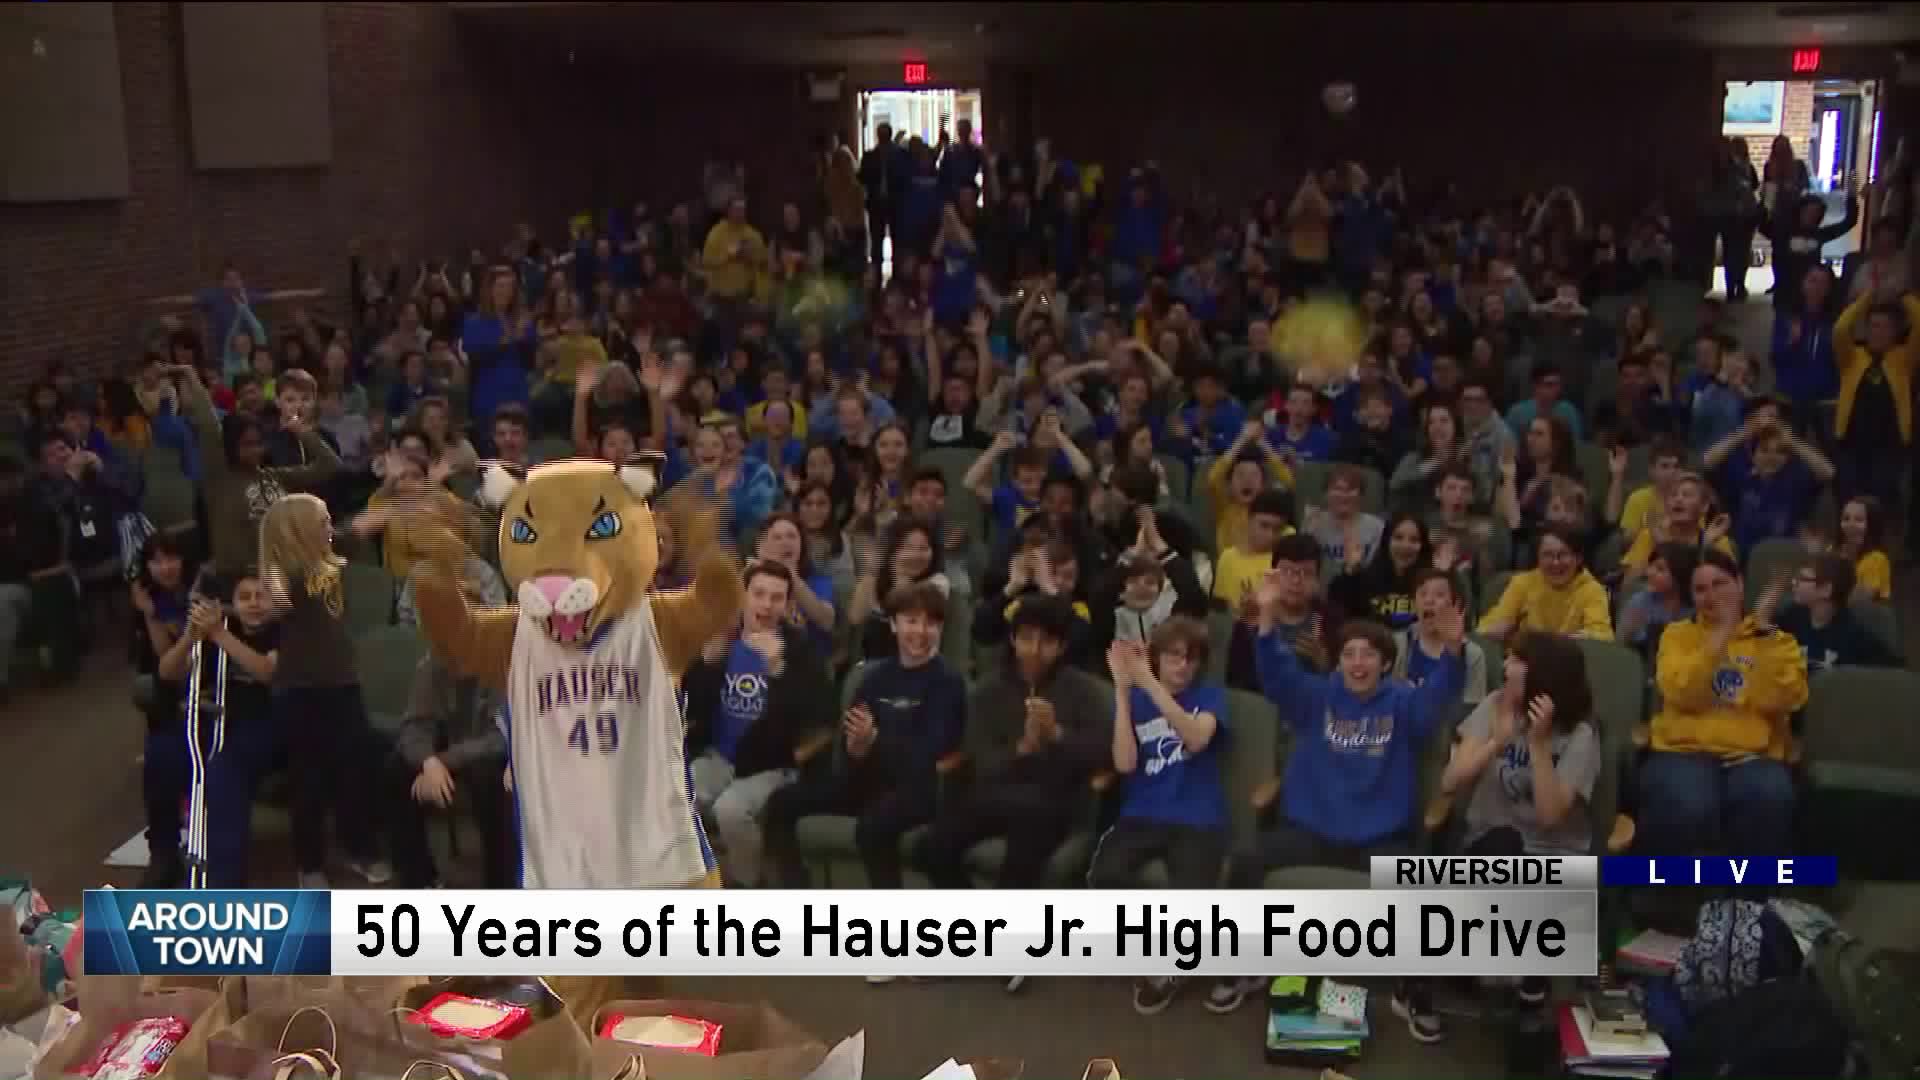 Around Town visits Hauser Jr. High for their 50th annual food drive